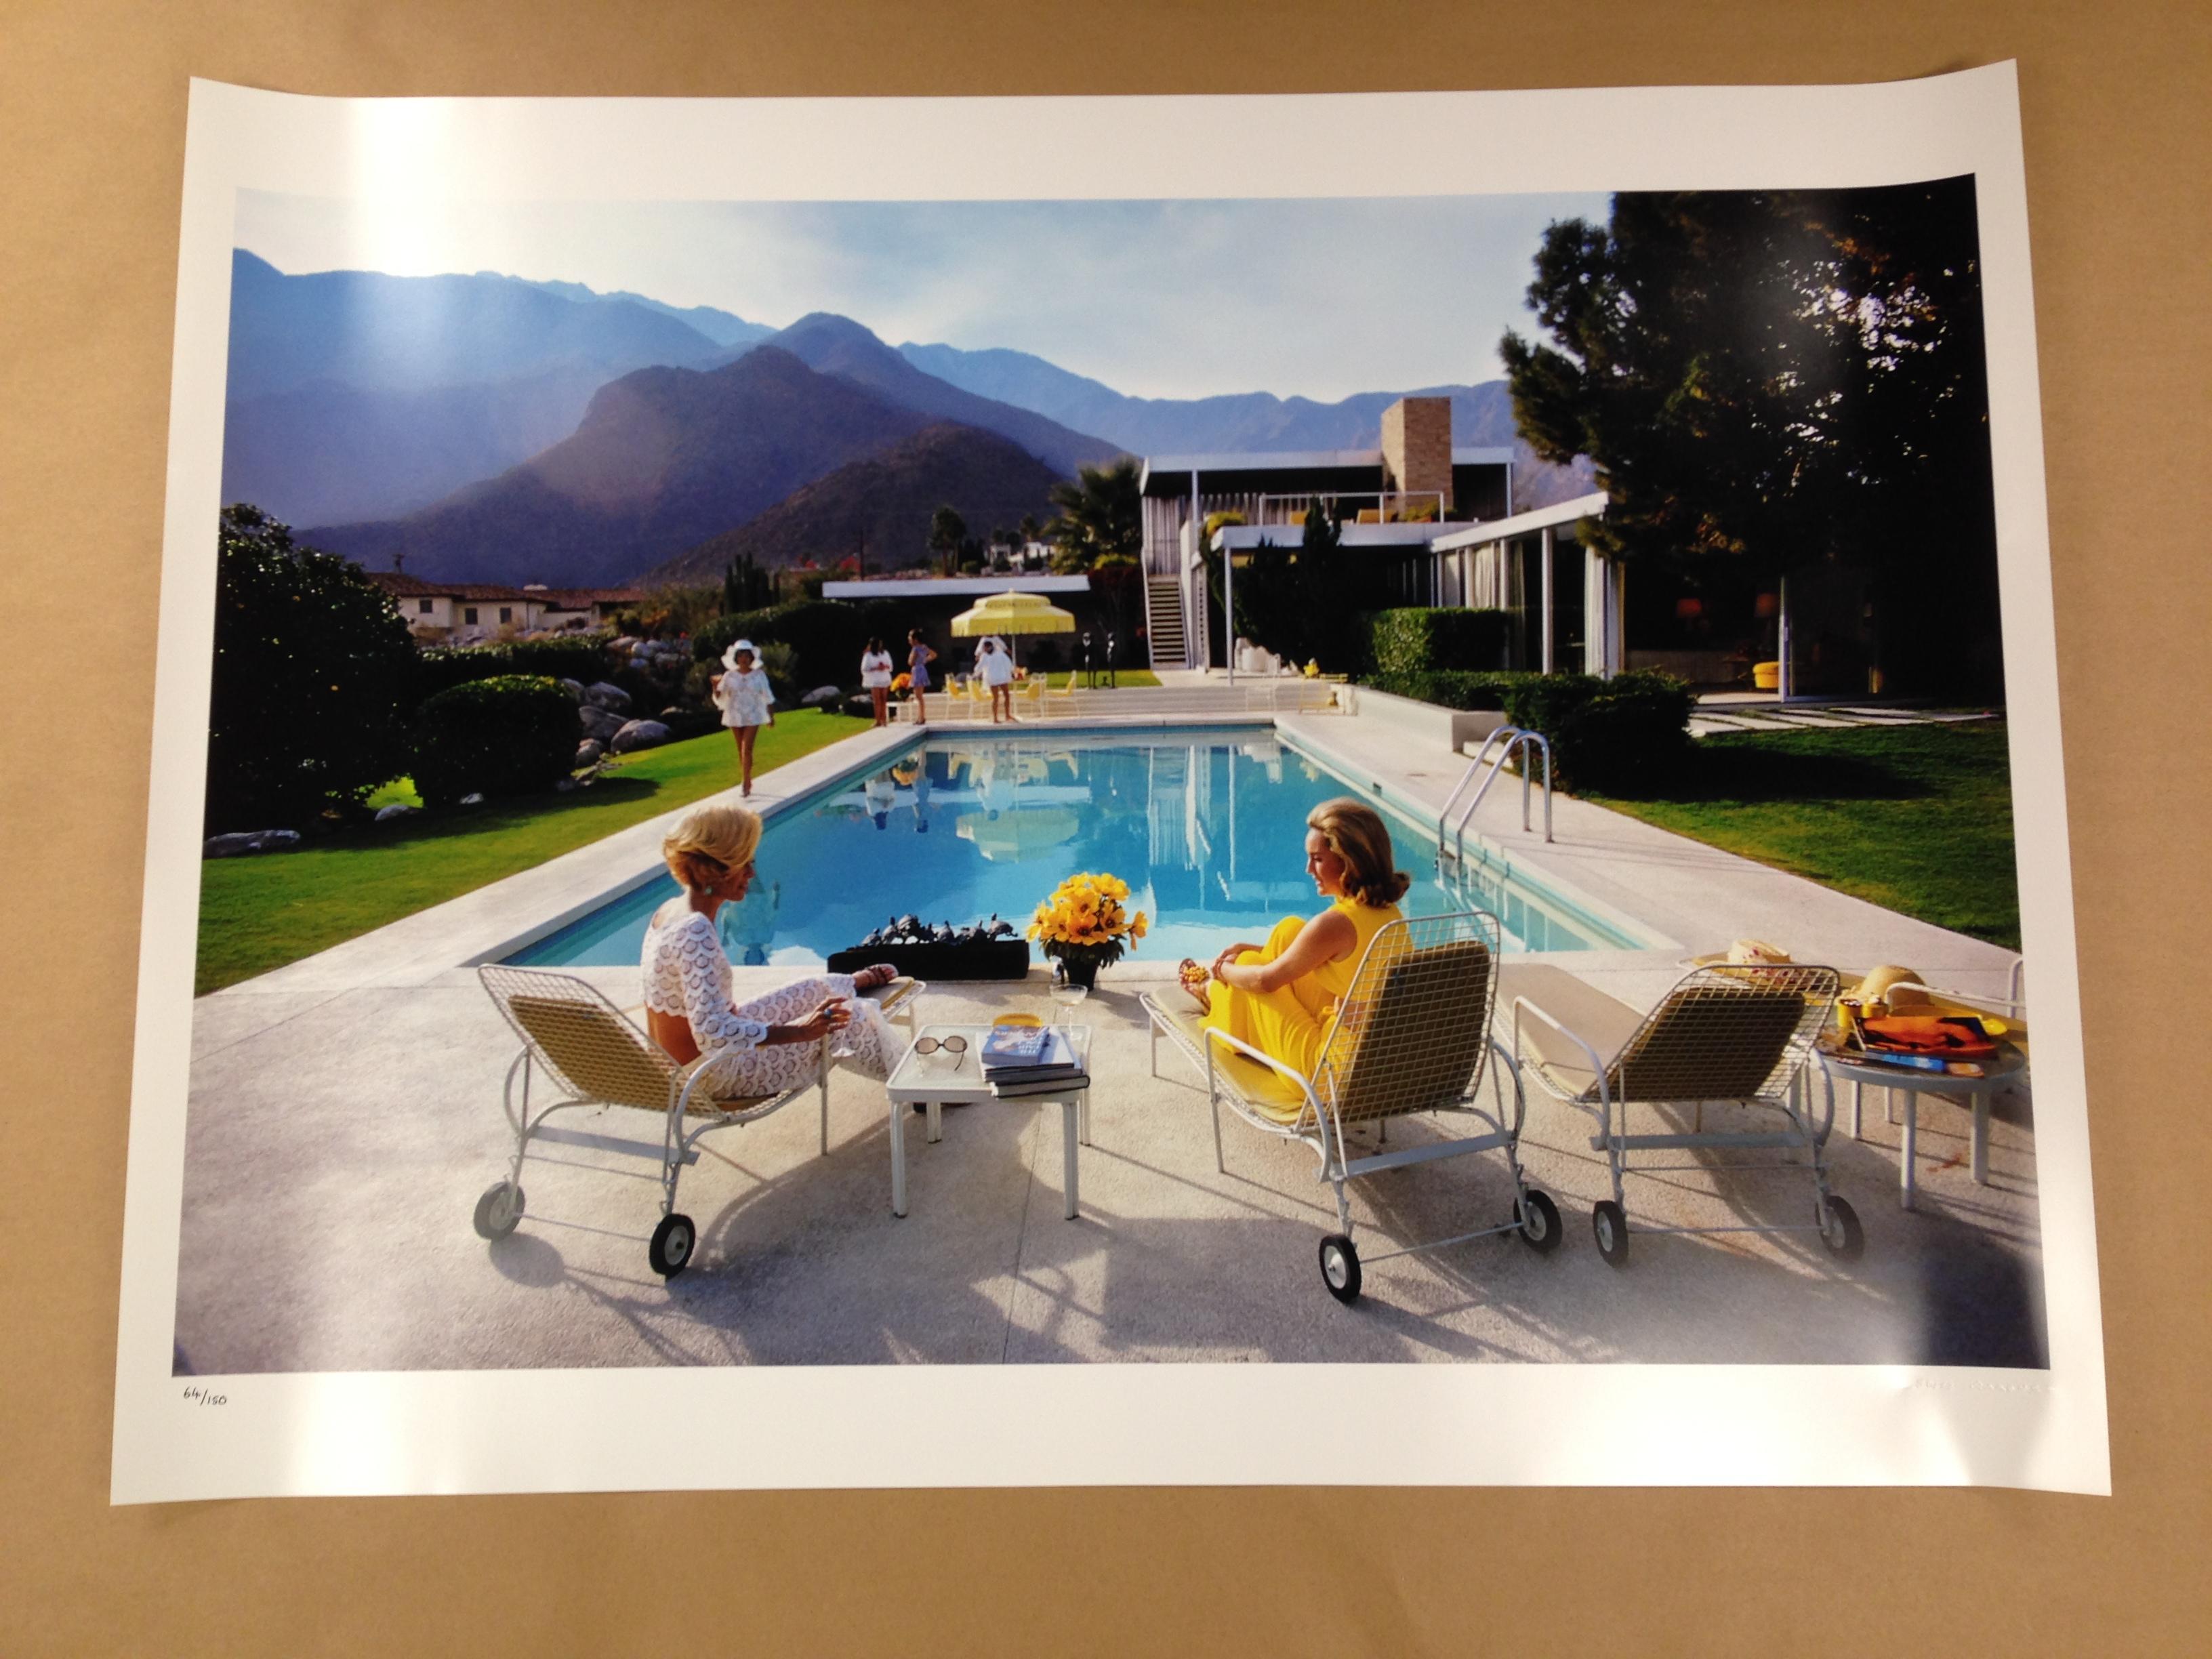 Slim Aarons 
Monte Carlo Beach Club
4 sizes available
Slim Aarons Estate Edition

72 x 48 inches (at this size, this is a little soft, commensurate with the time period of the photograph—I’d want to be sure the client understands that if they want